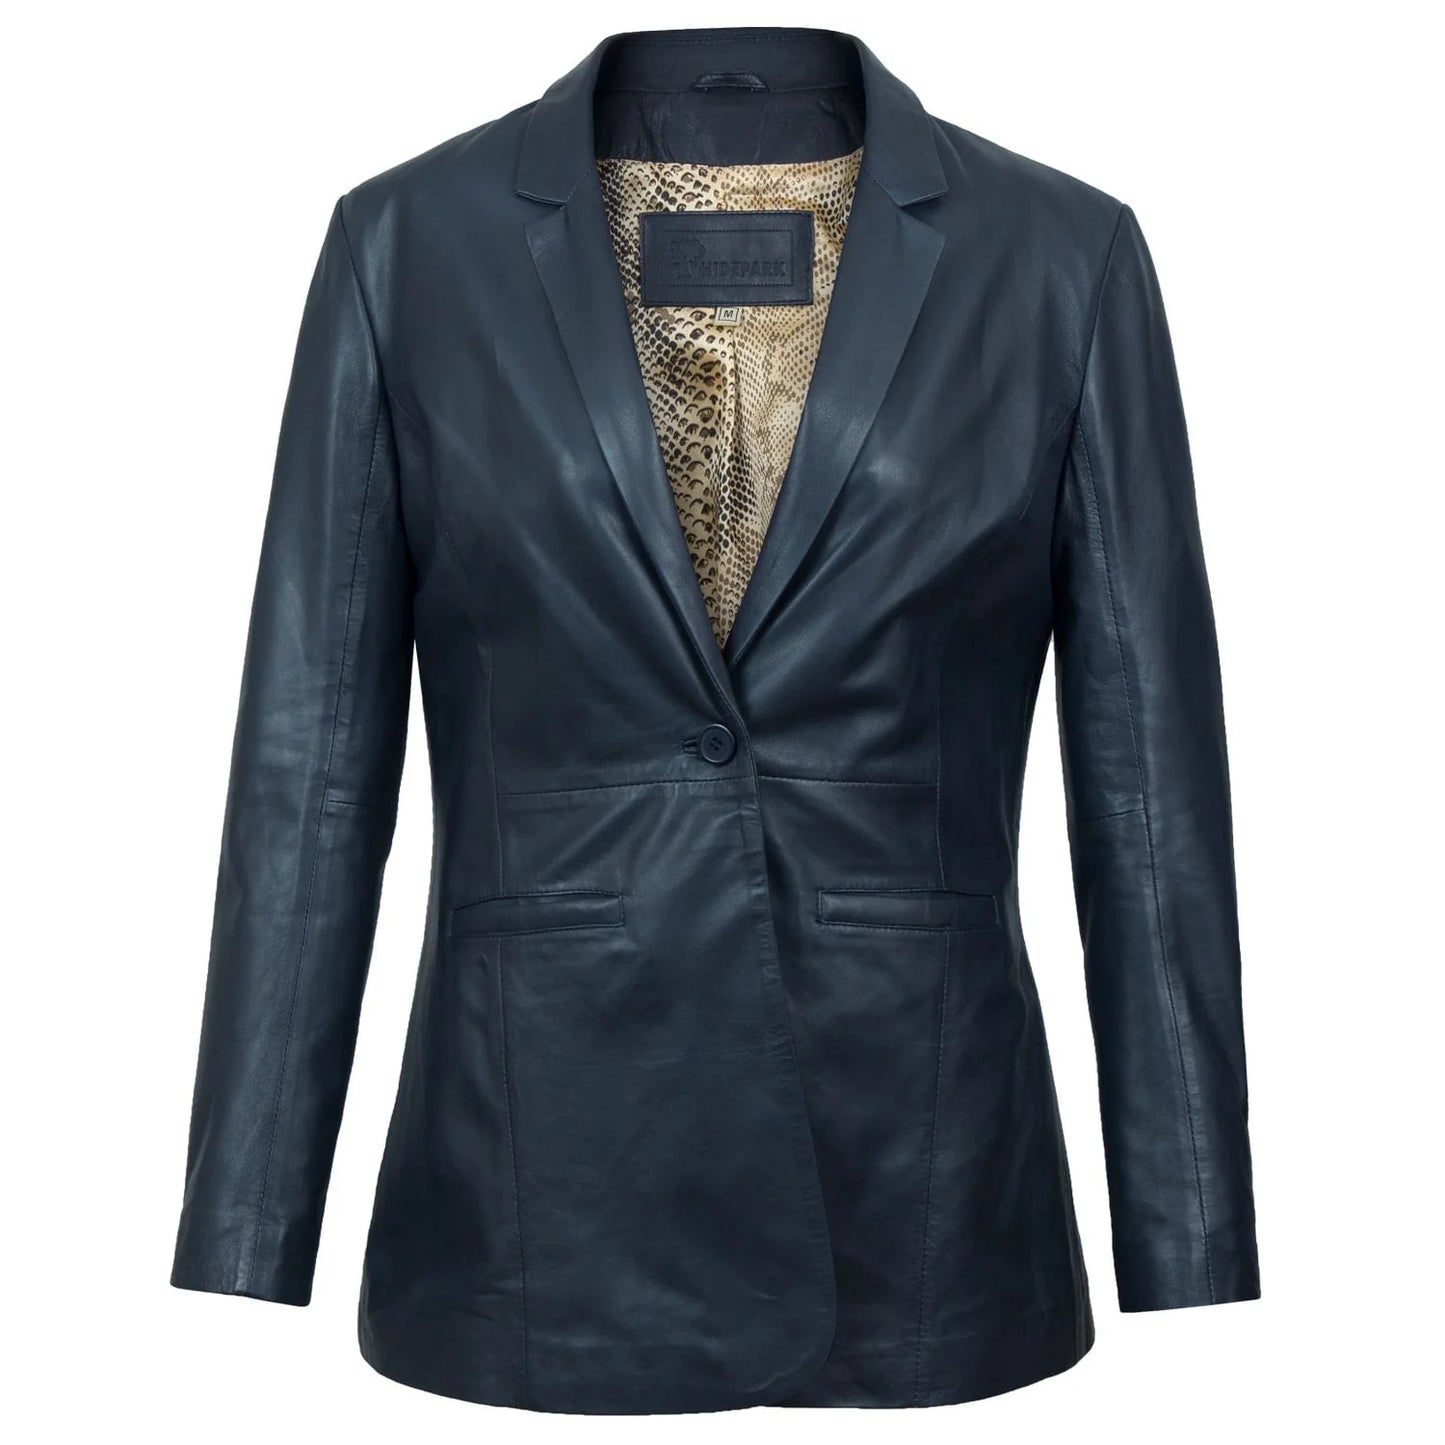 Women's Stylish Fitted Leather Blazer